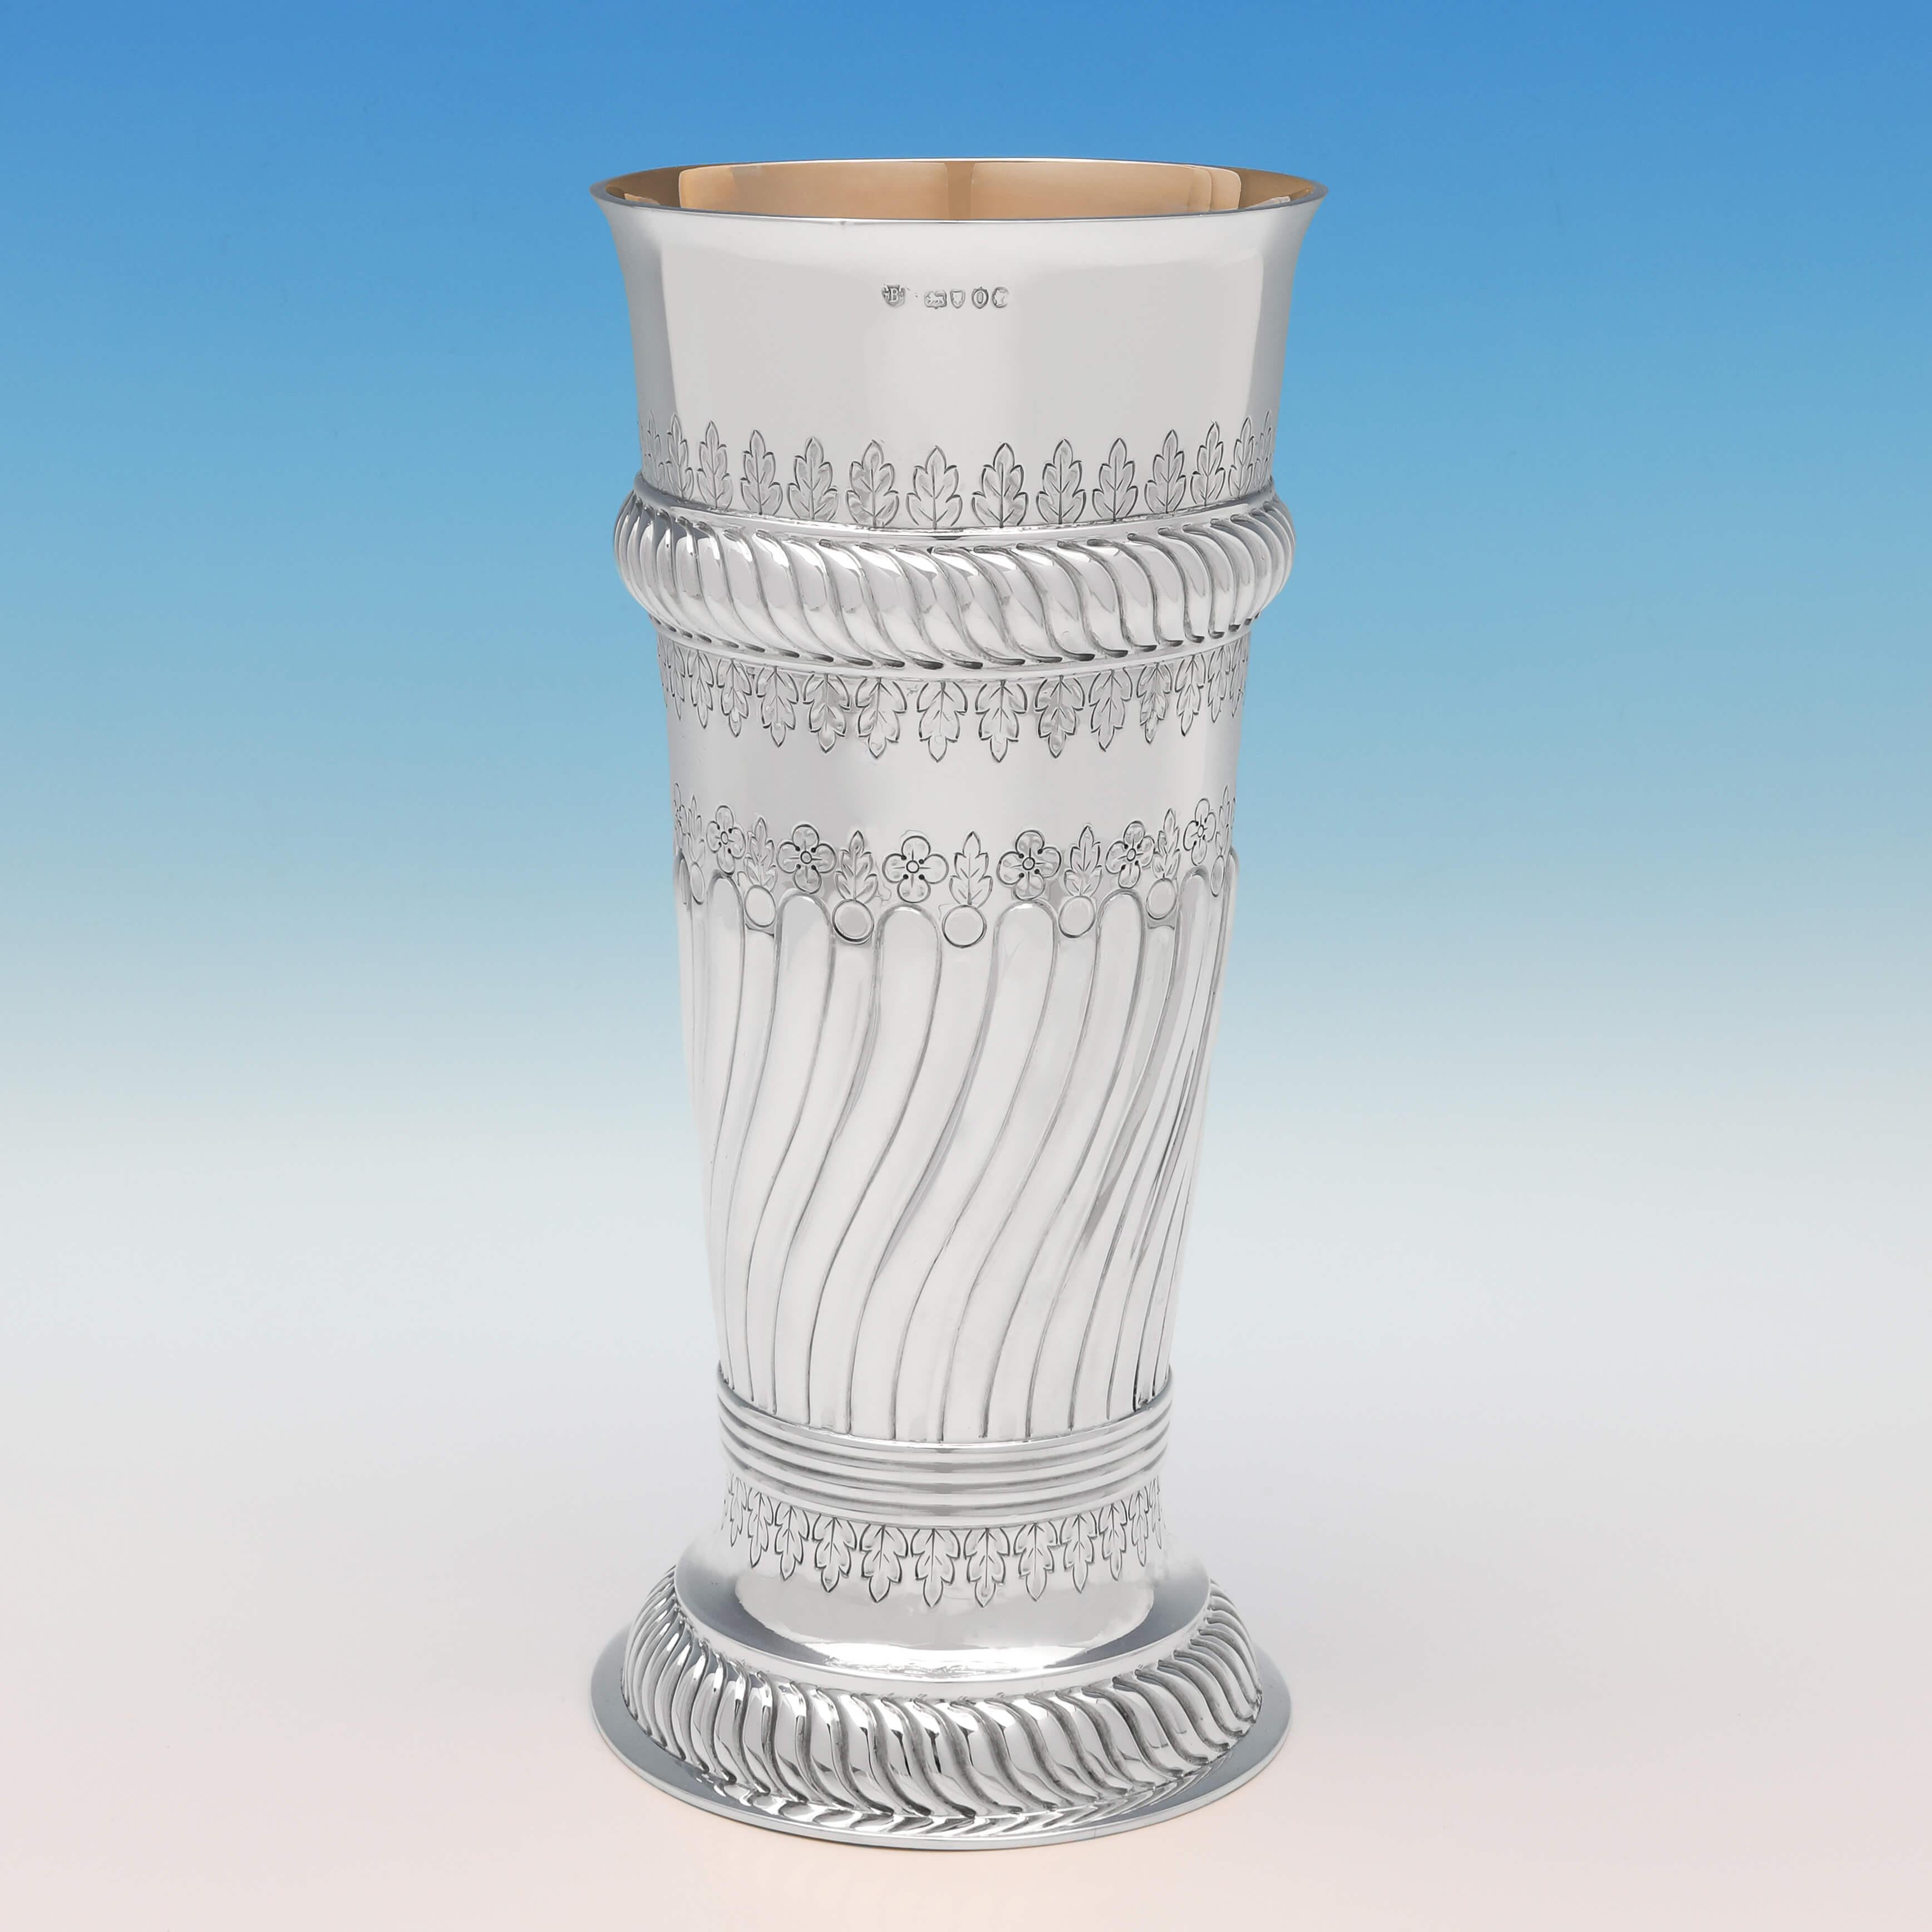 Hallmarked in London in 1889 by Barnards, this attractive, Victorian, antique sterling silver vase, features swirled fluting, chased decoration throughout, and a gilt interior. The vase measures: 10.5